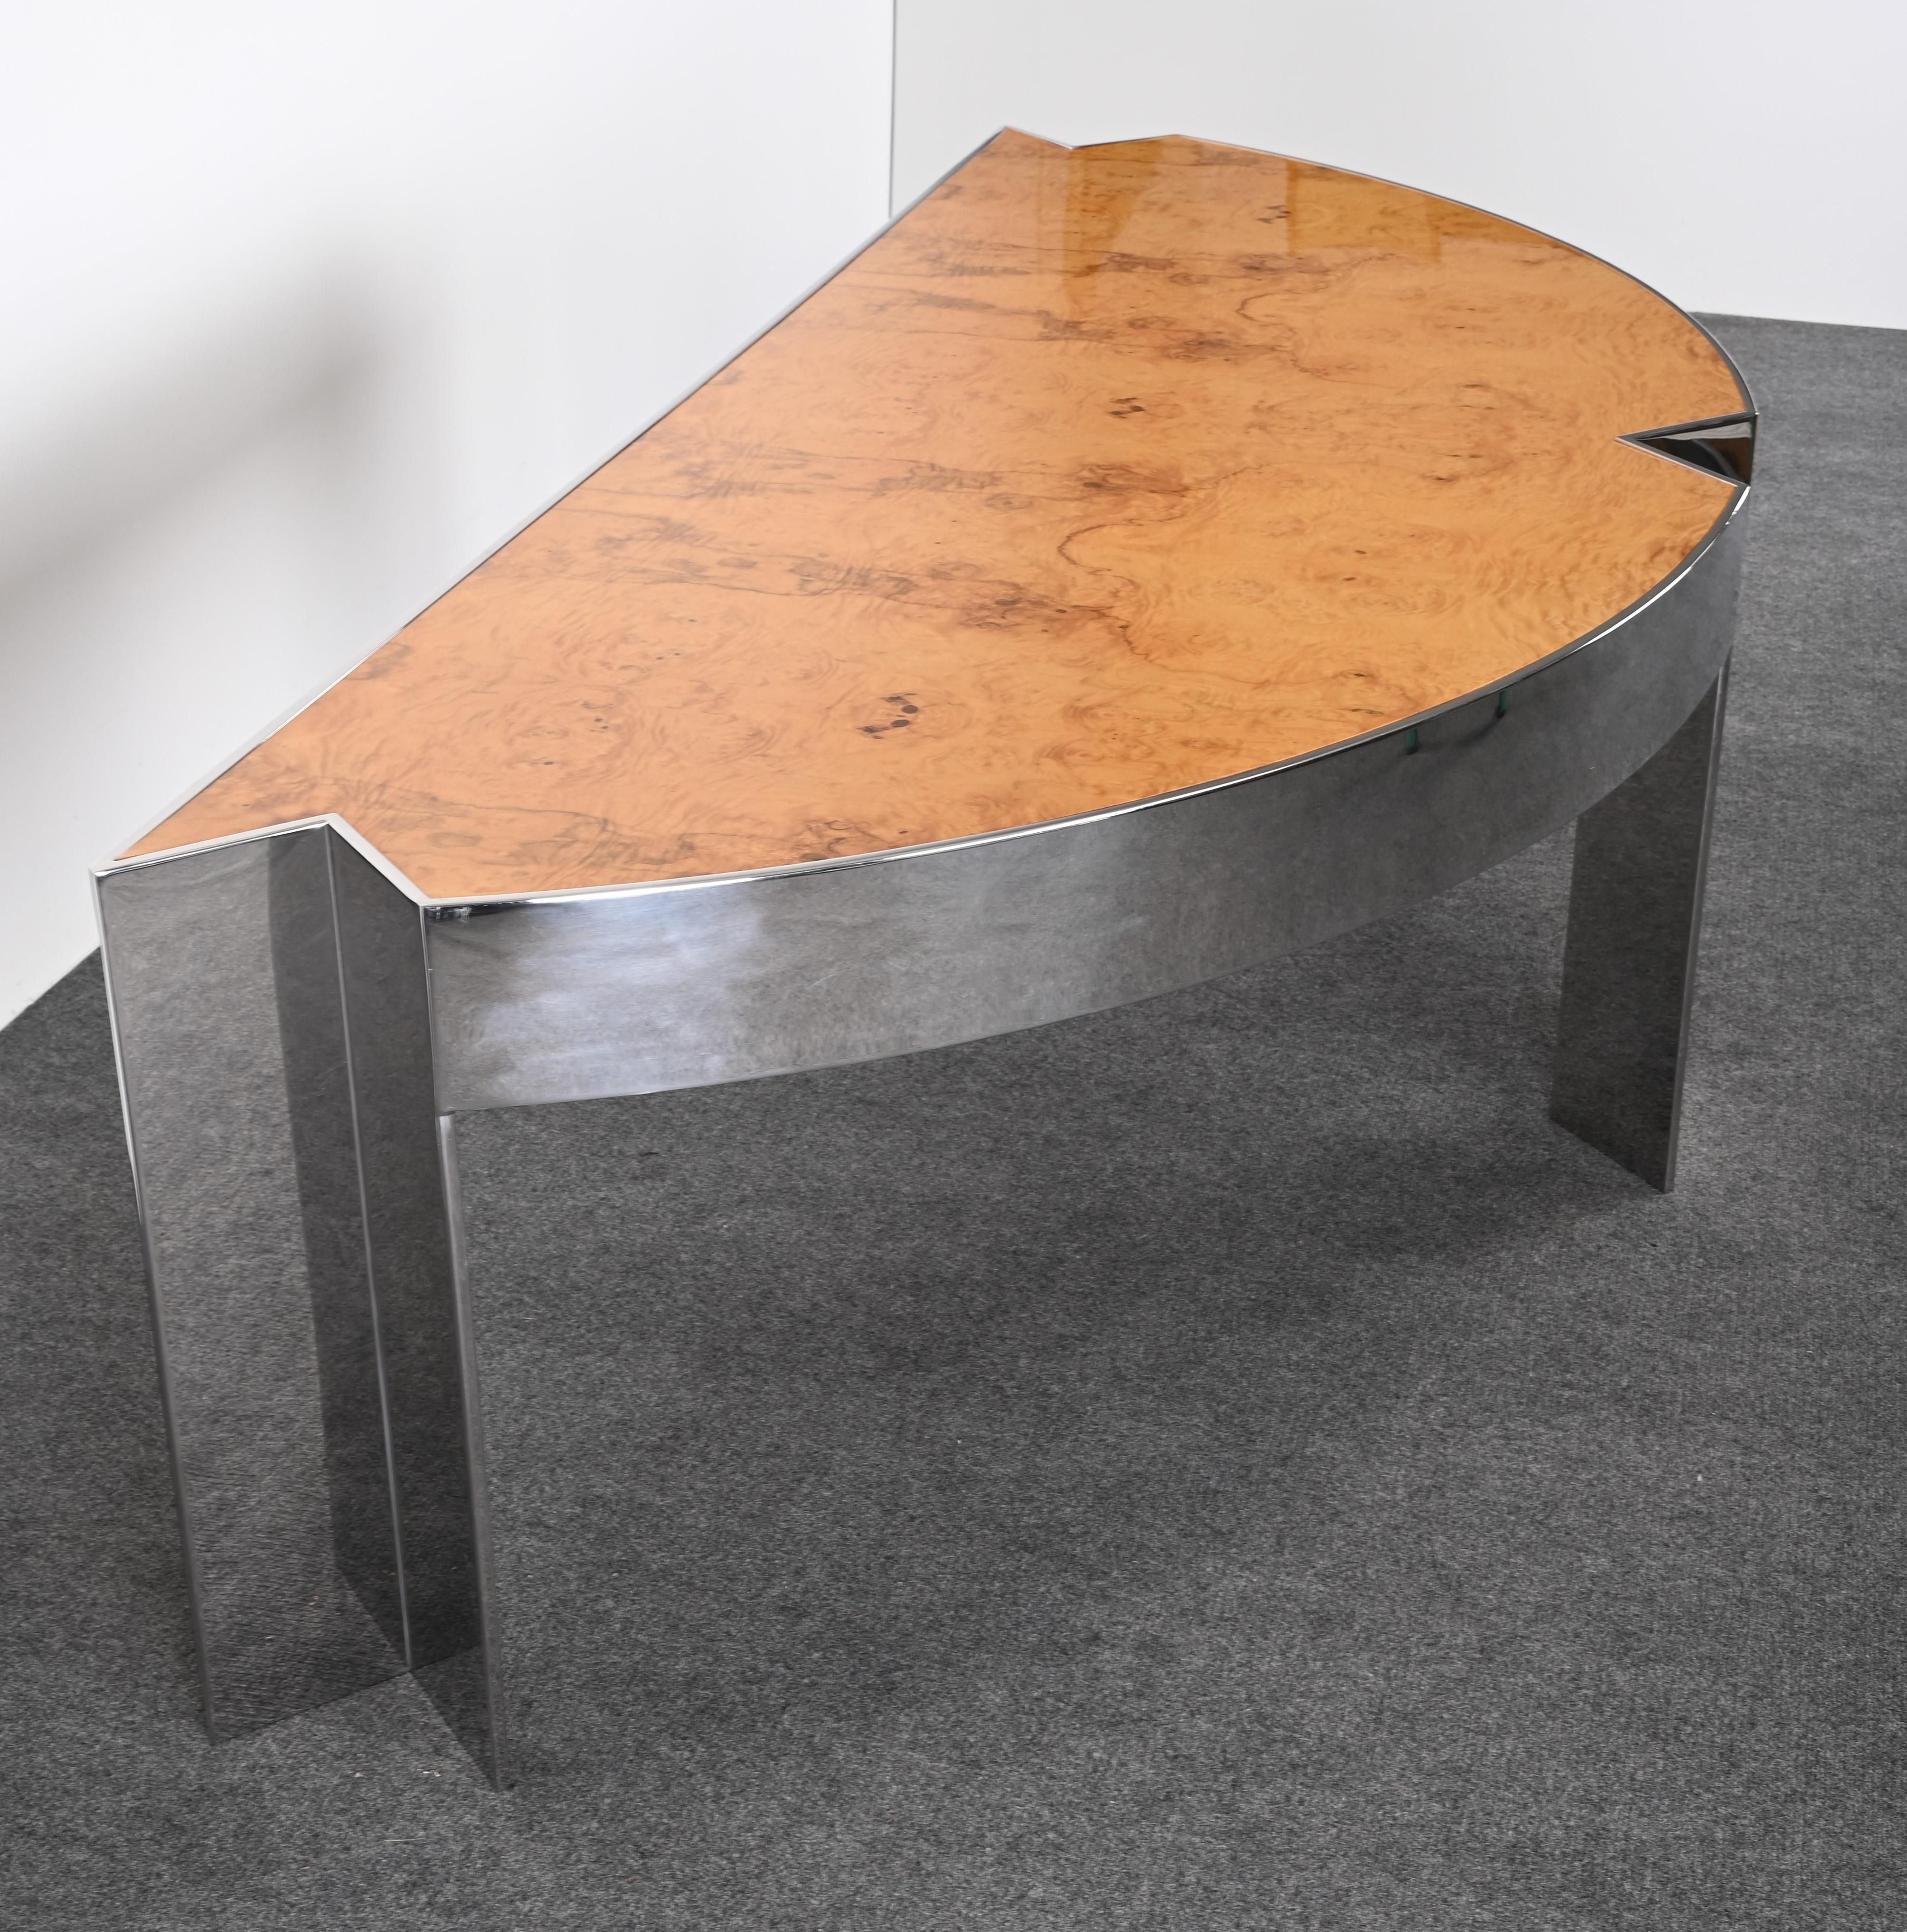 Stainless Steel and Burl Wood Desk by Leon Rosen for Pace, 1980s For Sale 14